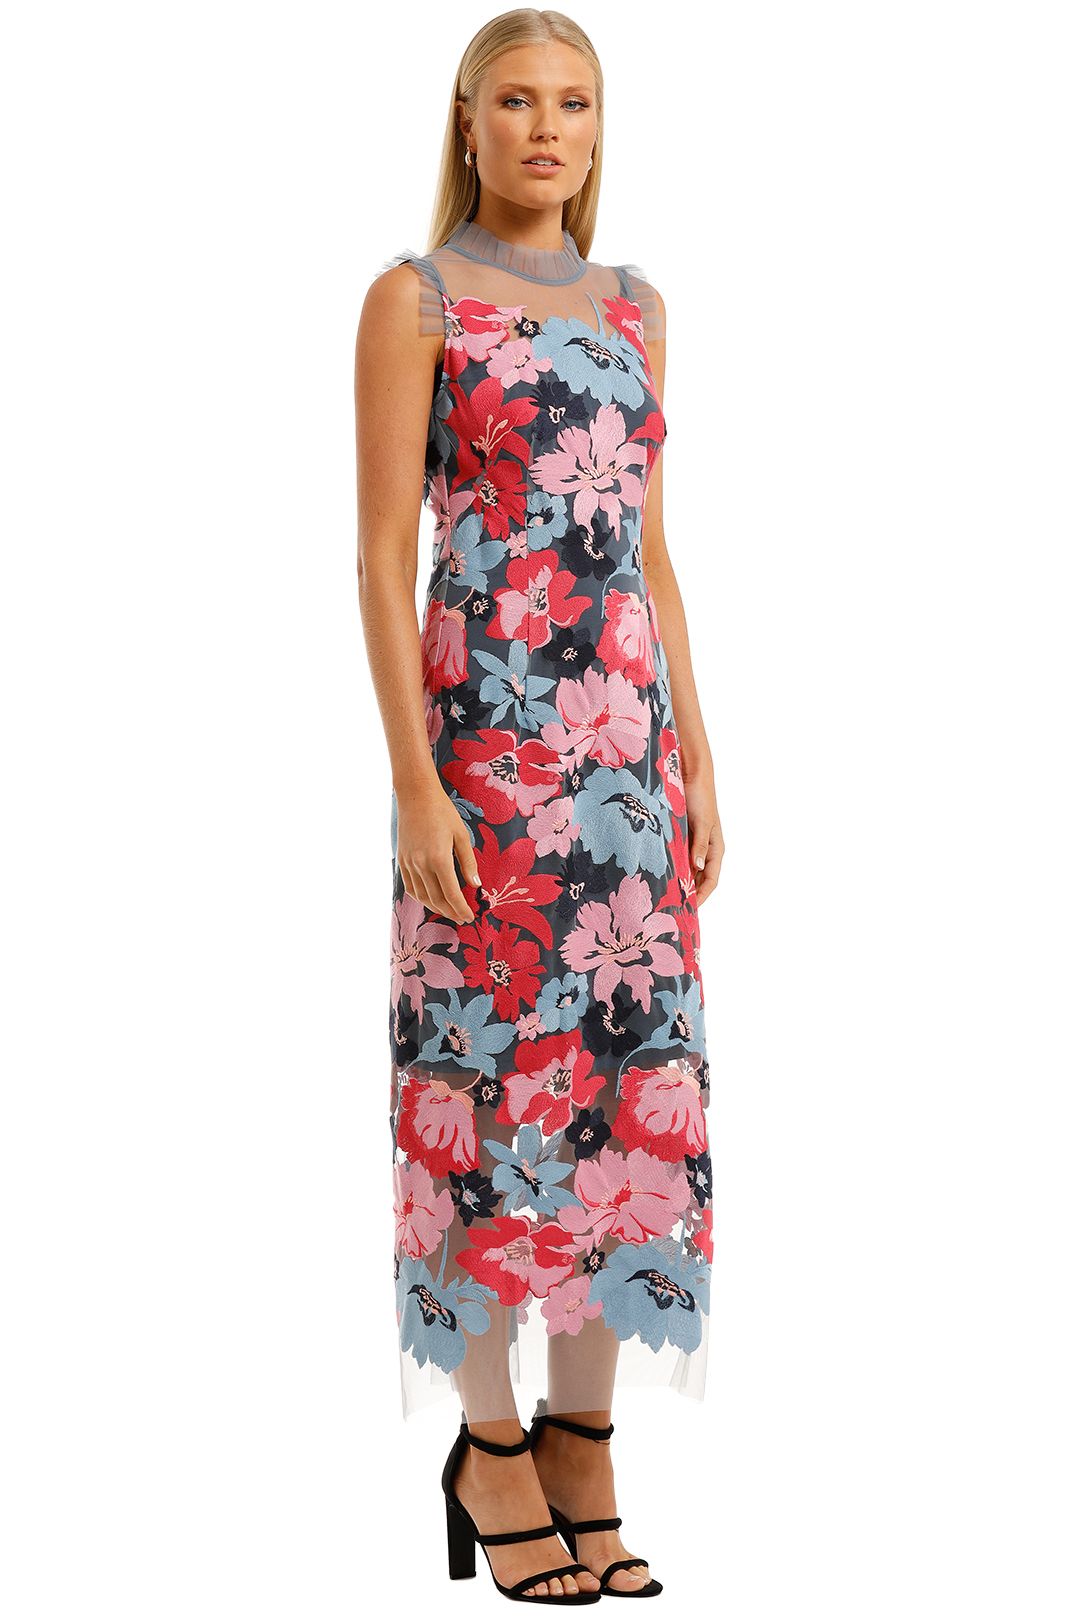 Moss-and-Spy-Bianca-Dress-Floral-Side